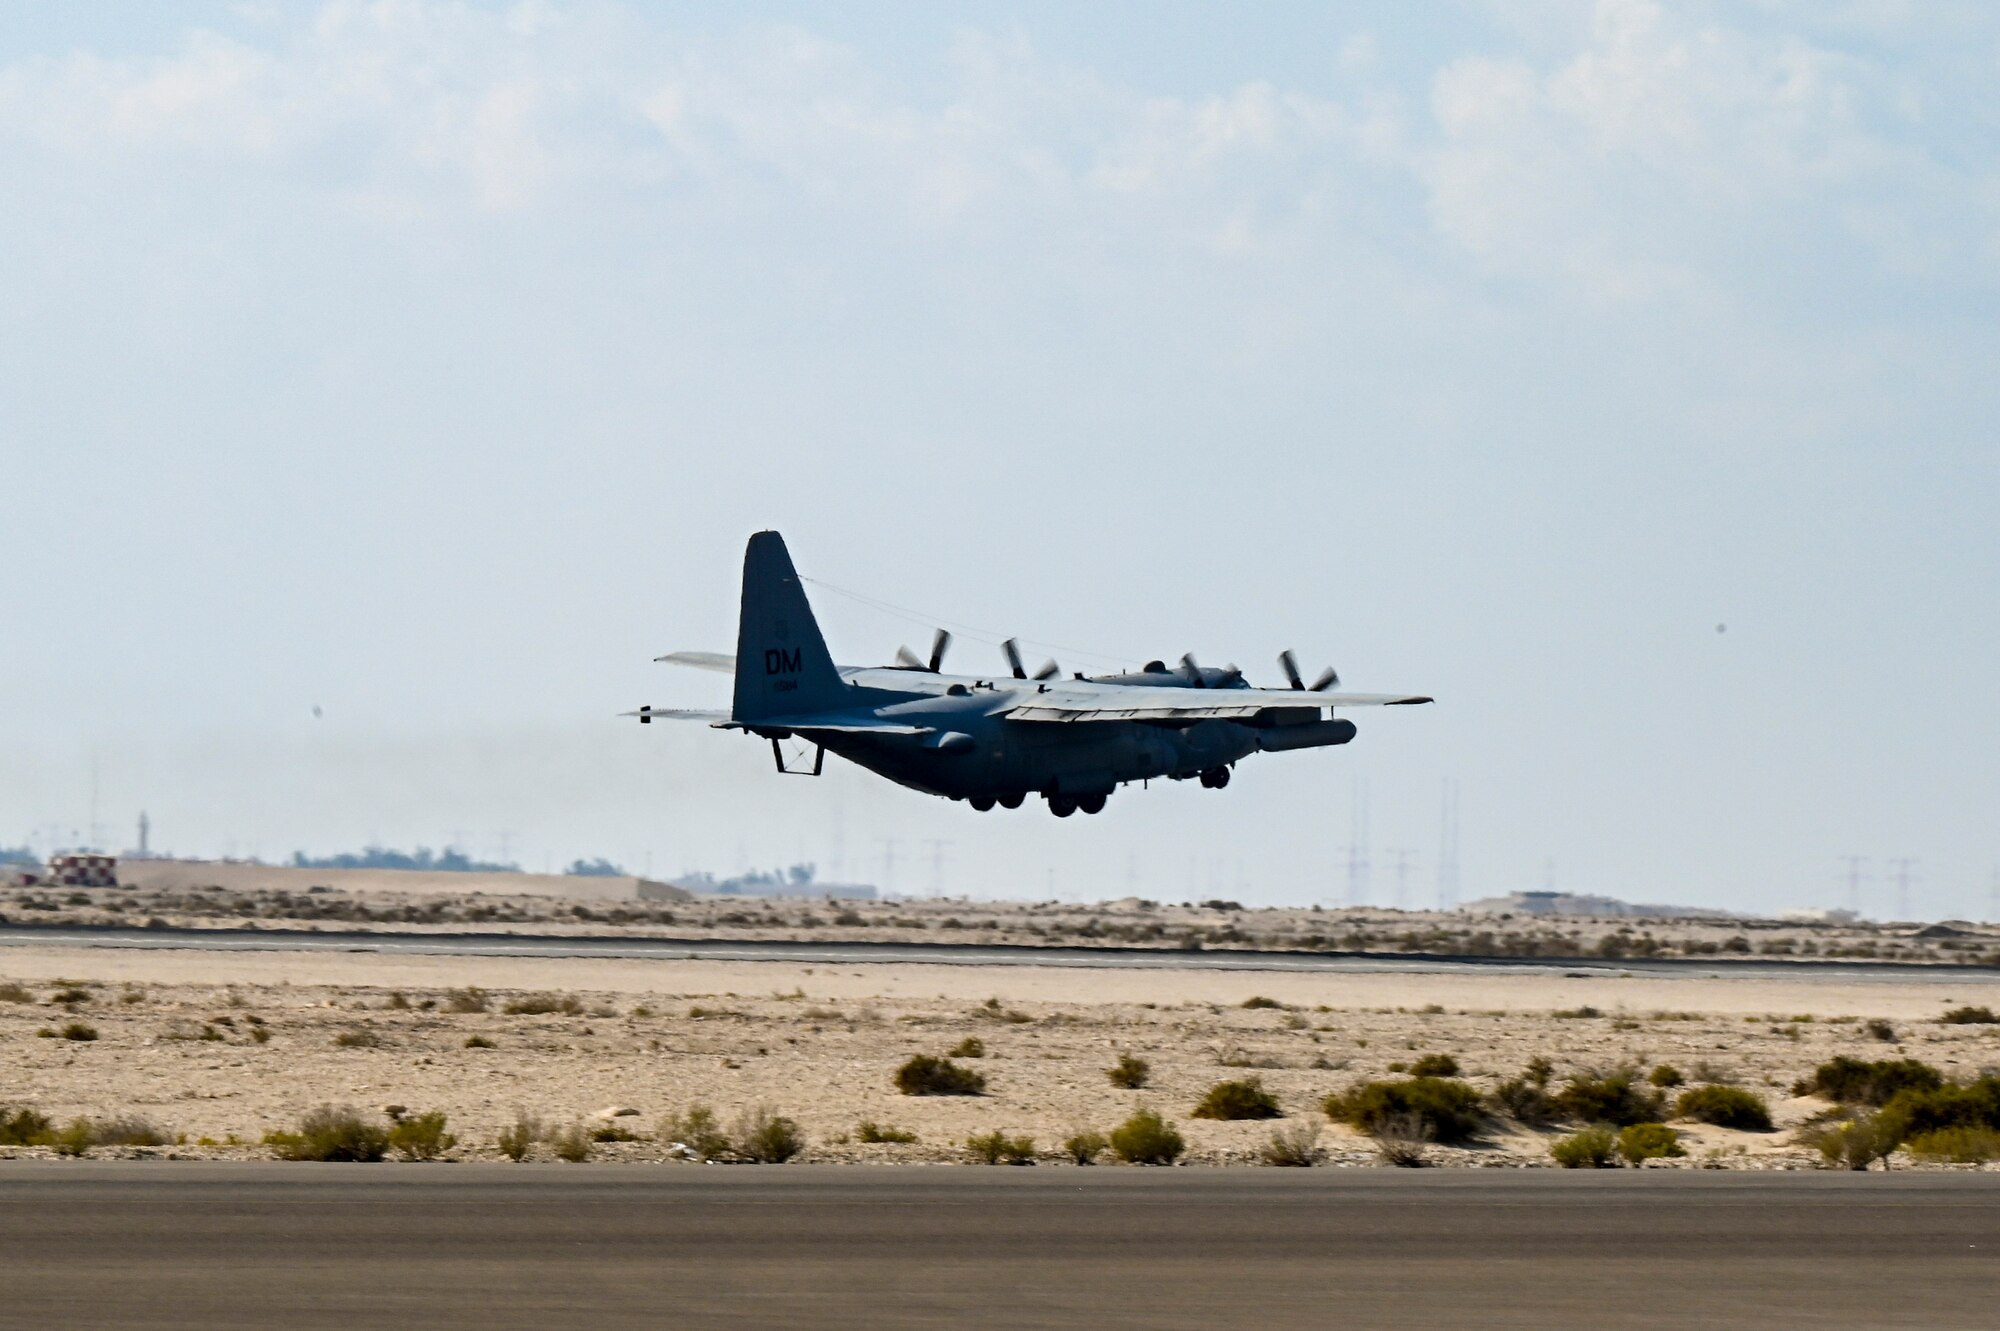 A U.S. Air Force EC-130H Compass Call assigned to the 41st Expeditionary Electronic Combat Squadron takes off at Al Dhafra Air Base, United Arab Emirates, Dec. 10, 2020.  Aircraft assigned to the 380th Air Expeditionary Wing launched in support of a bomber task force mission in the U.S. Central Command theater of operations  (U.S. Air Force photo by Staff Sgt. Miranda A. Loera)